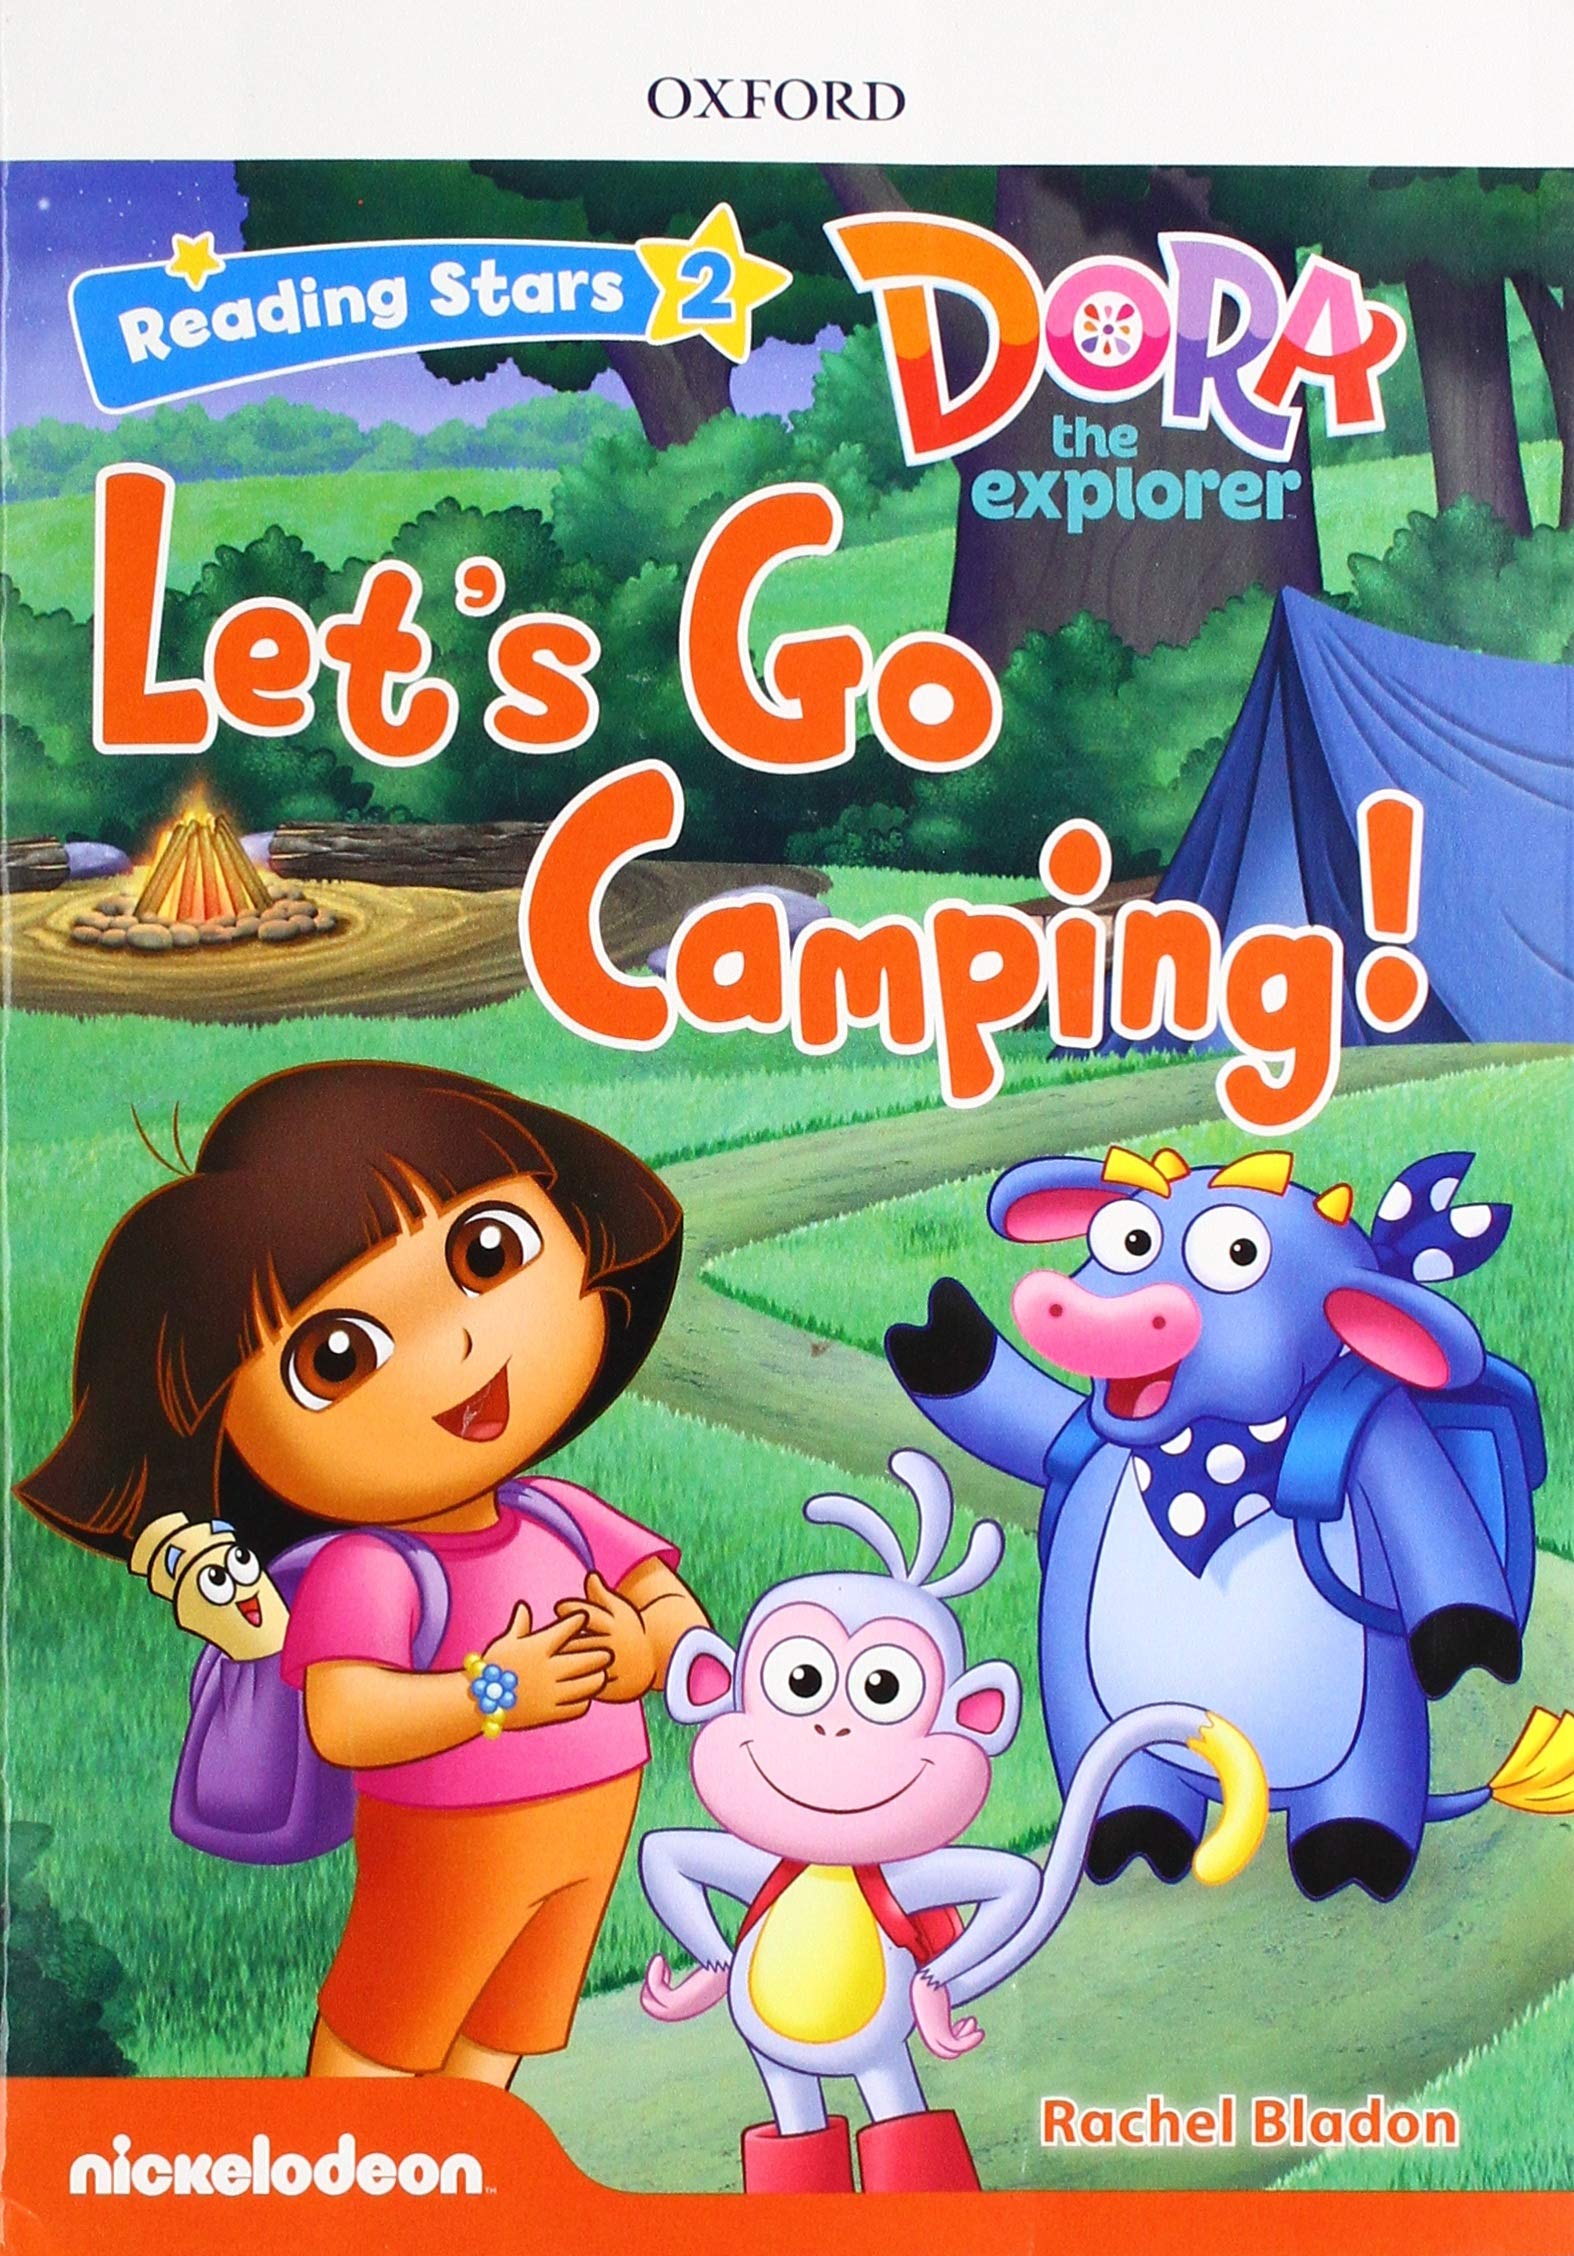 Reading Stars 2 Let's Go Camping!